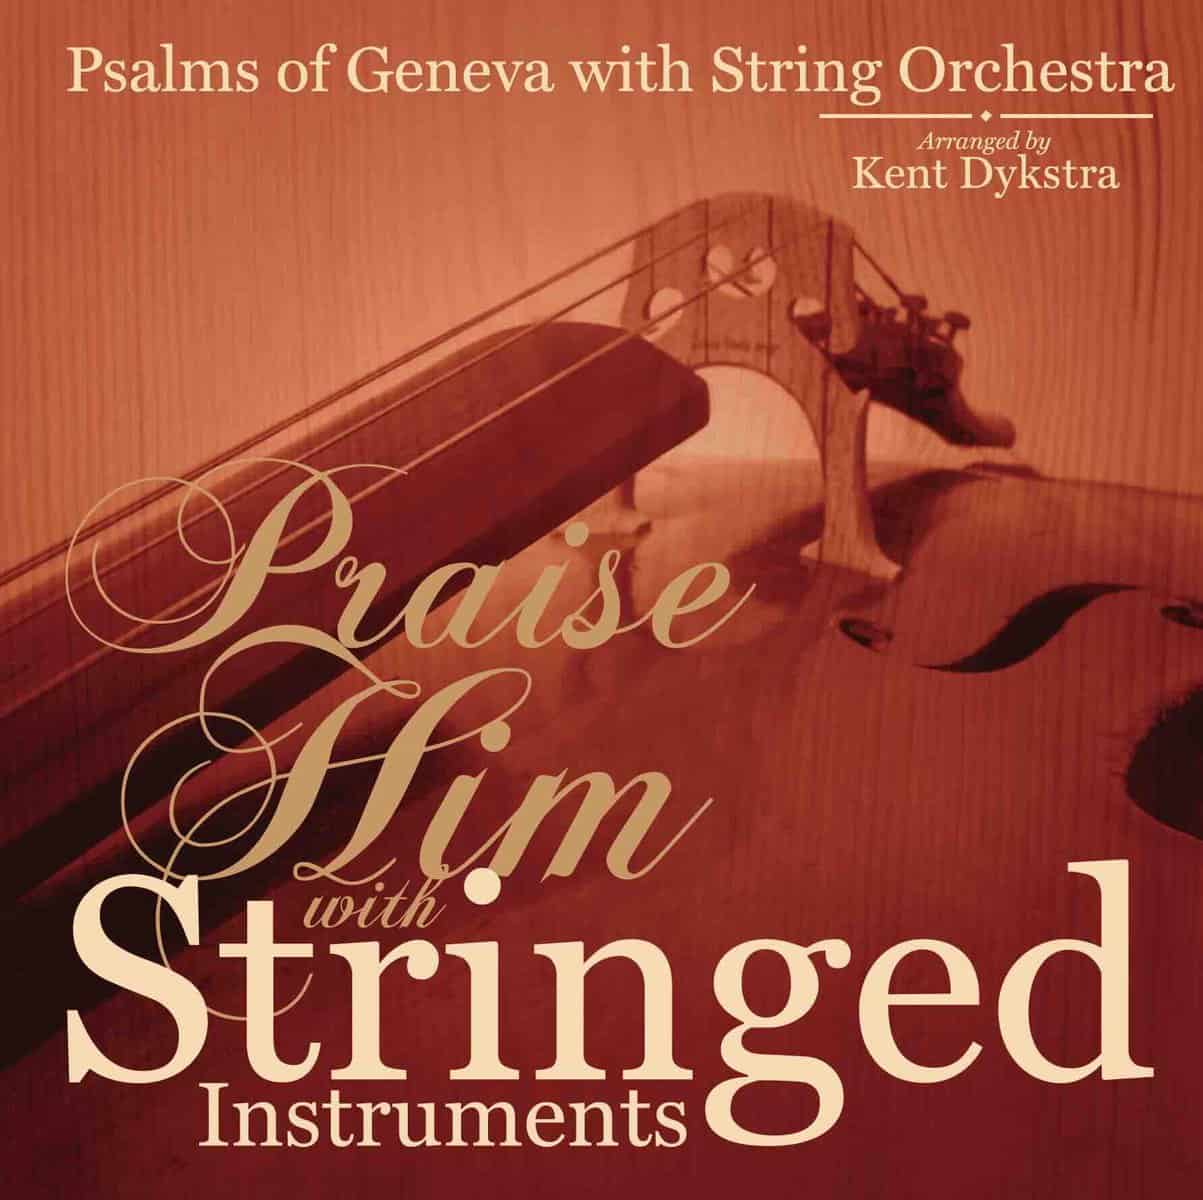 Cover image "Praise Him with Stringed Instruments: Volume 1" by Kent Dykstra